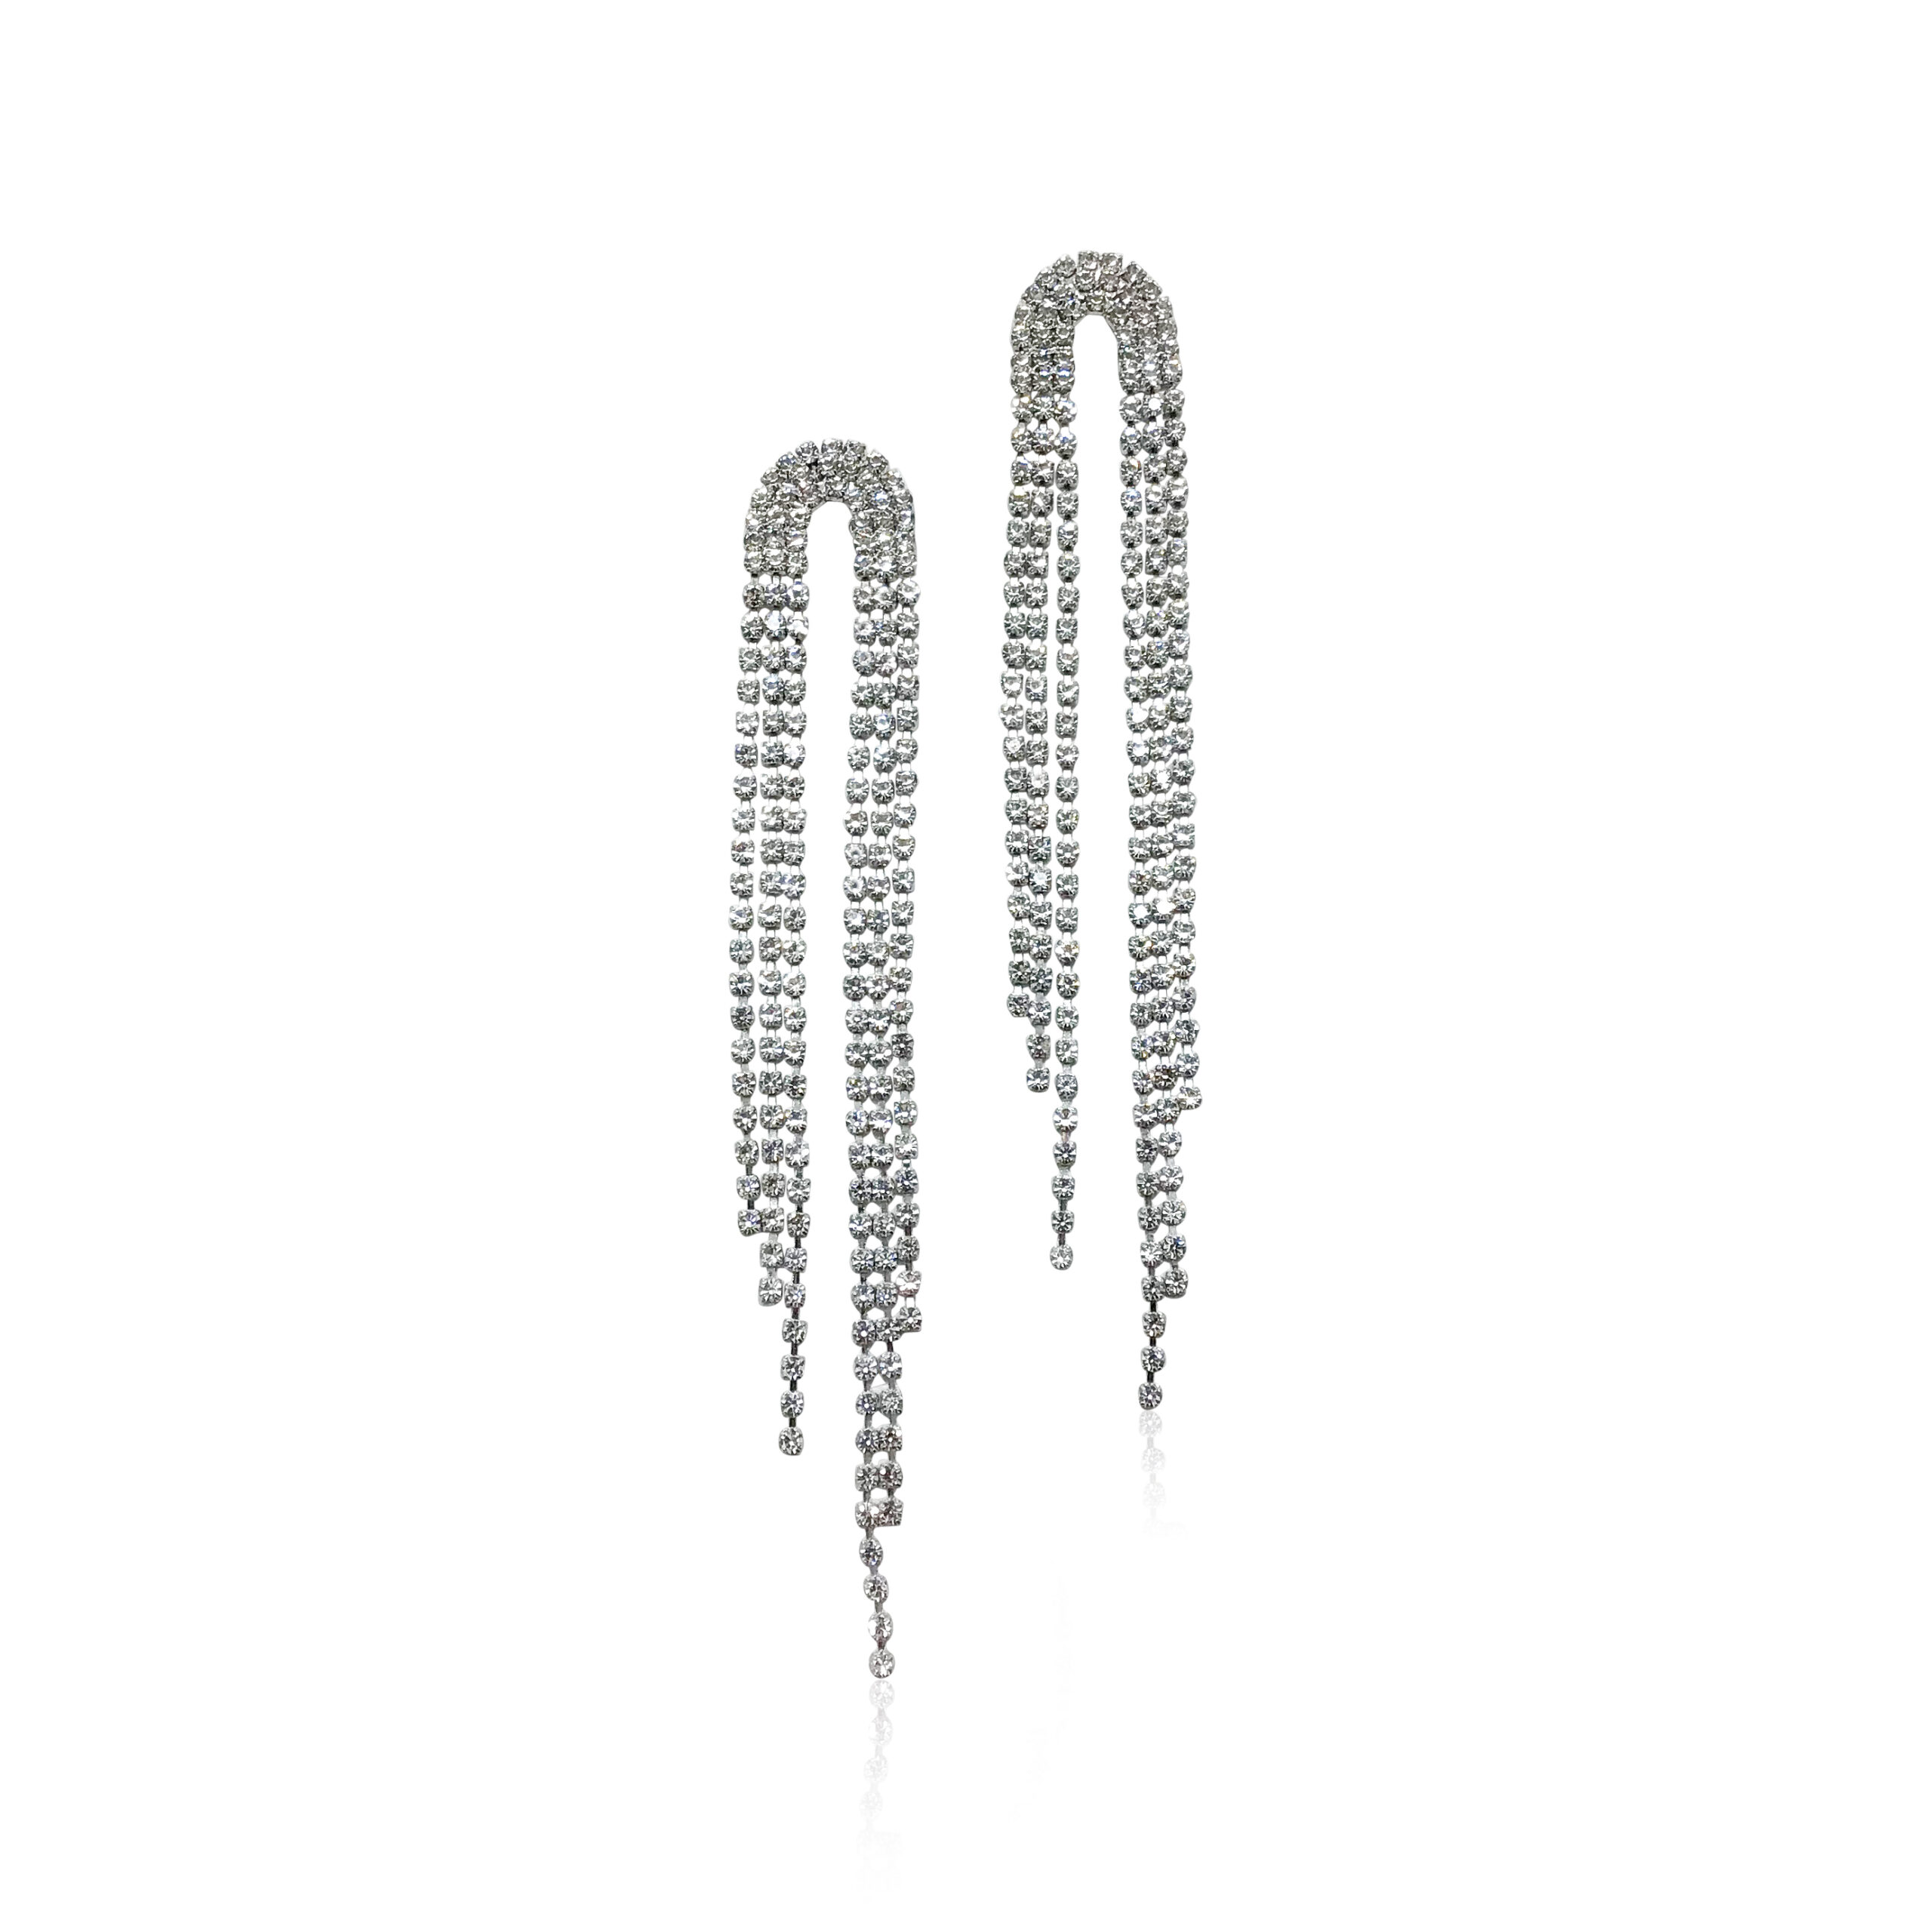 Petite Waterfall Chain Earring |Dolores|Jeanette Maree|Shop Online Now